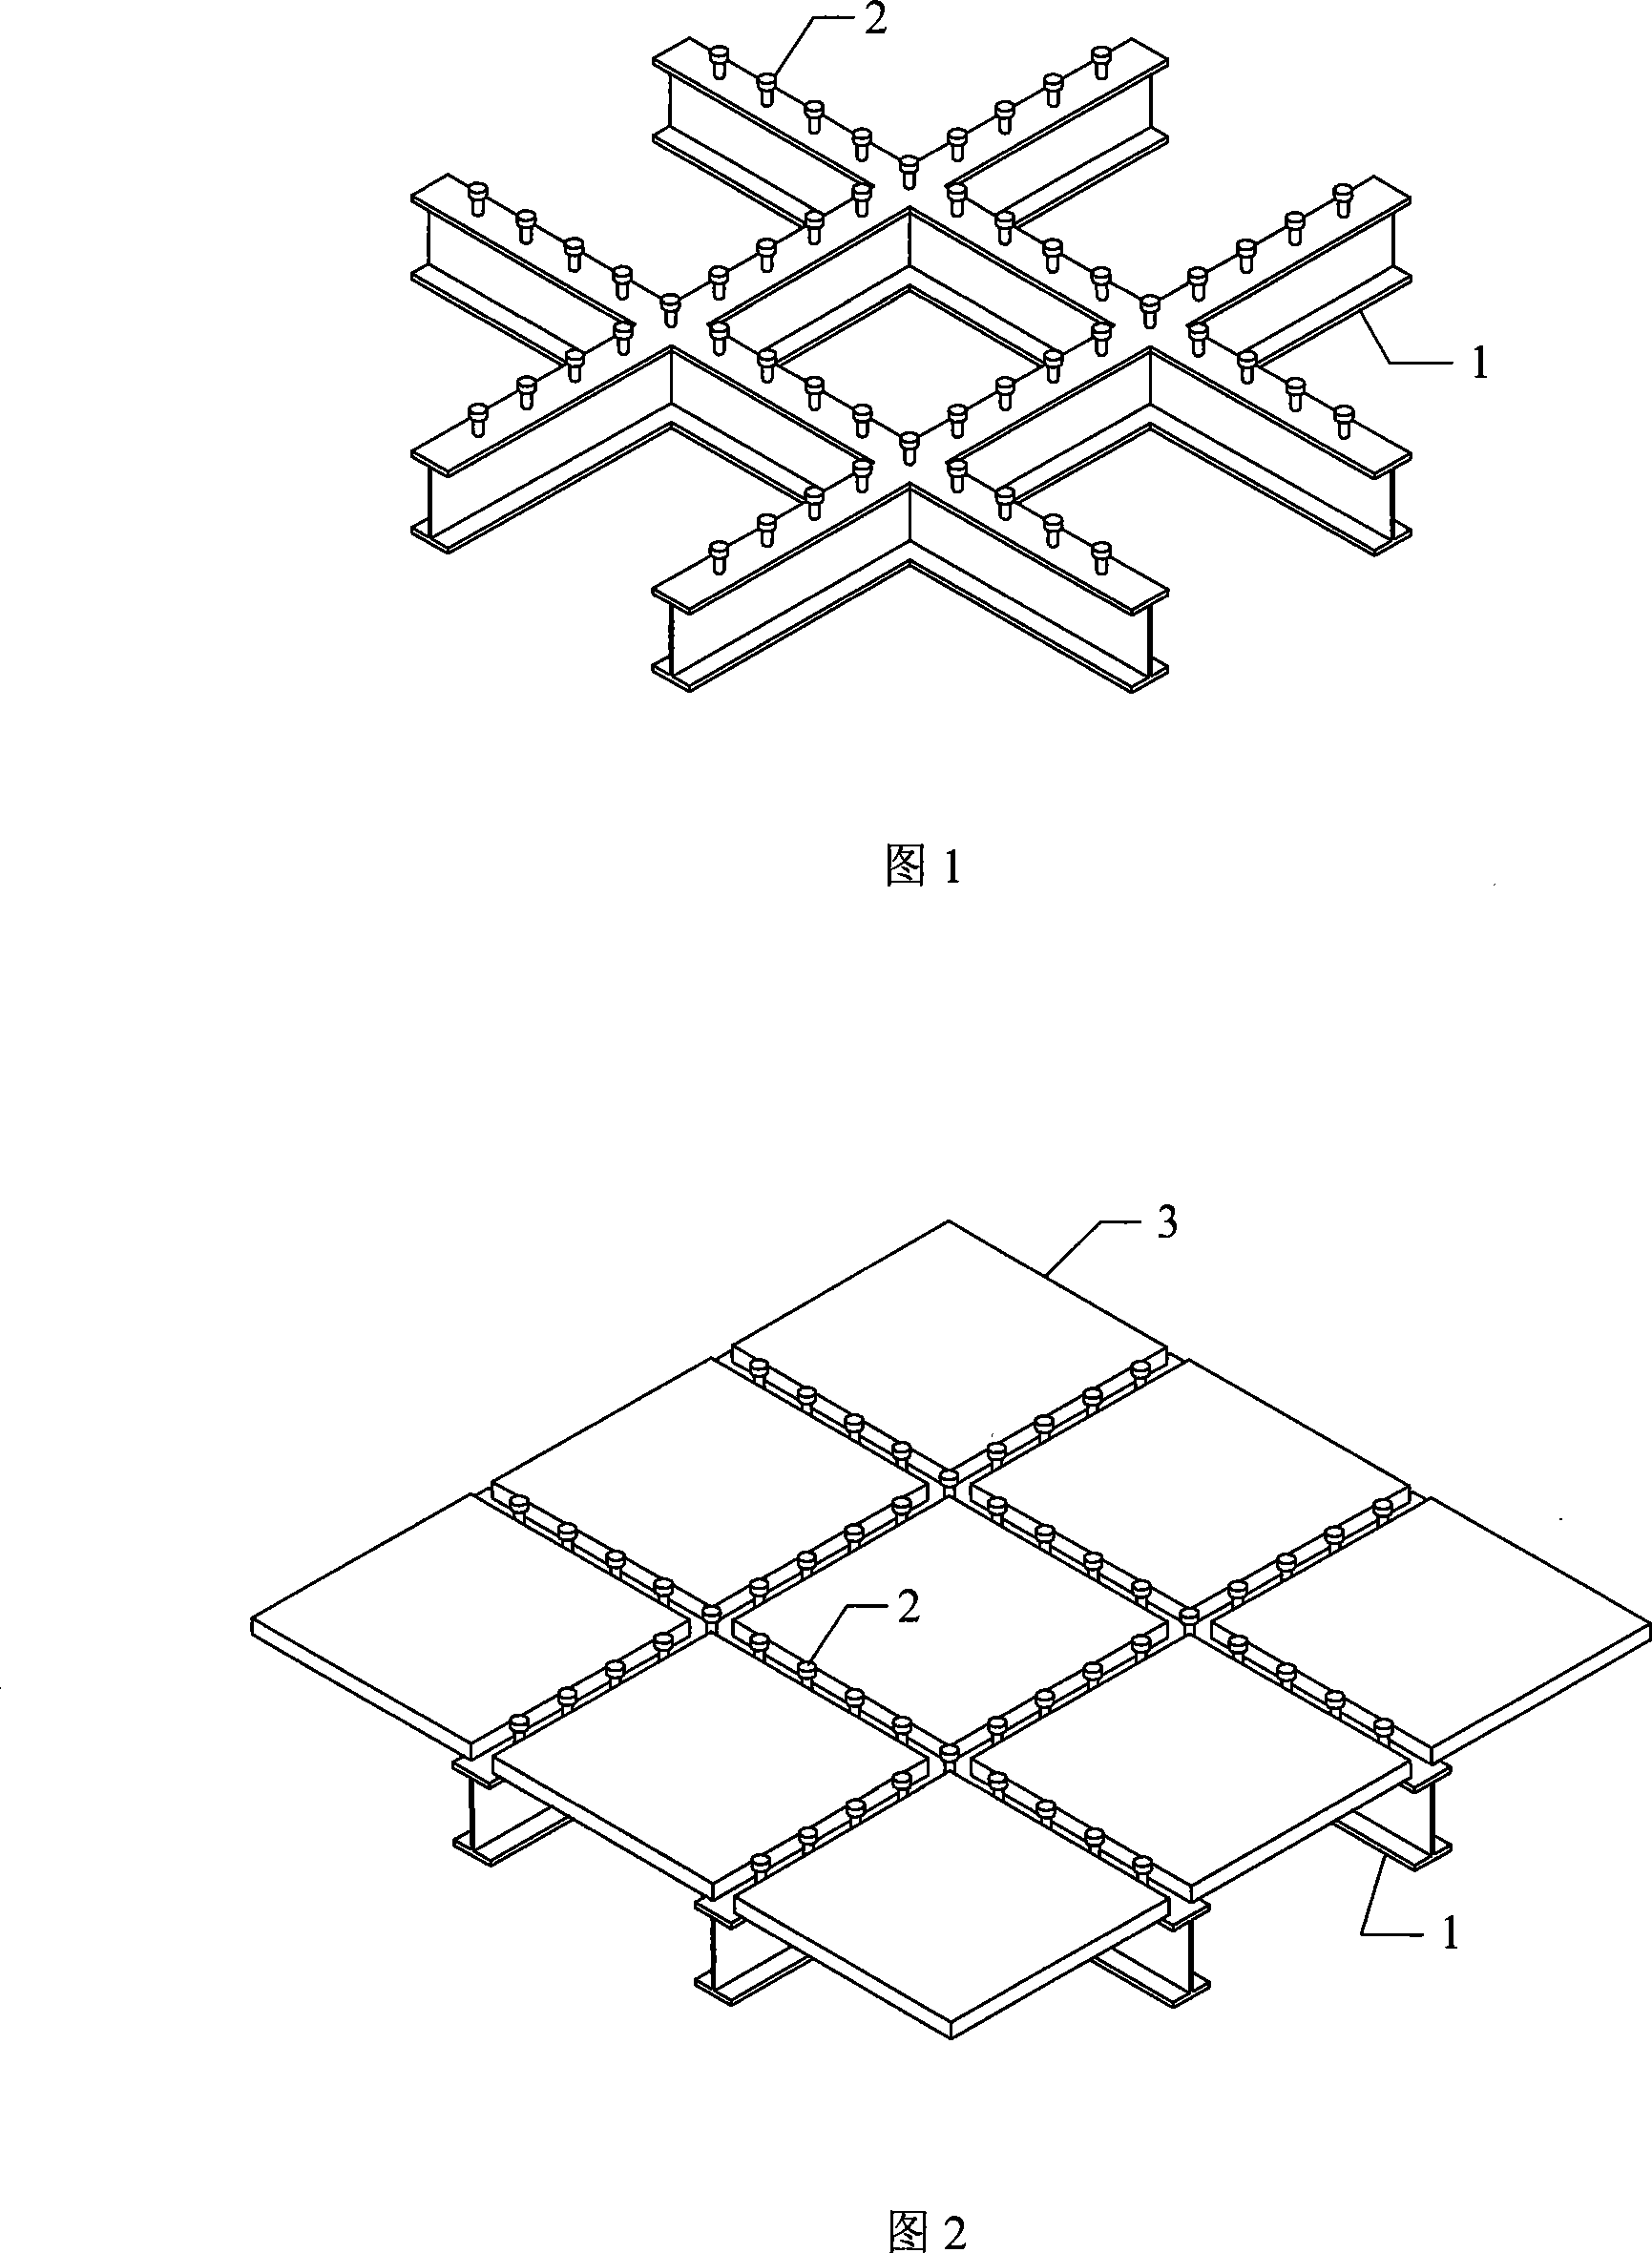 Bidirectional steel-stacked plate concrete composite building roof